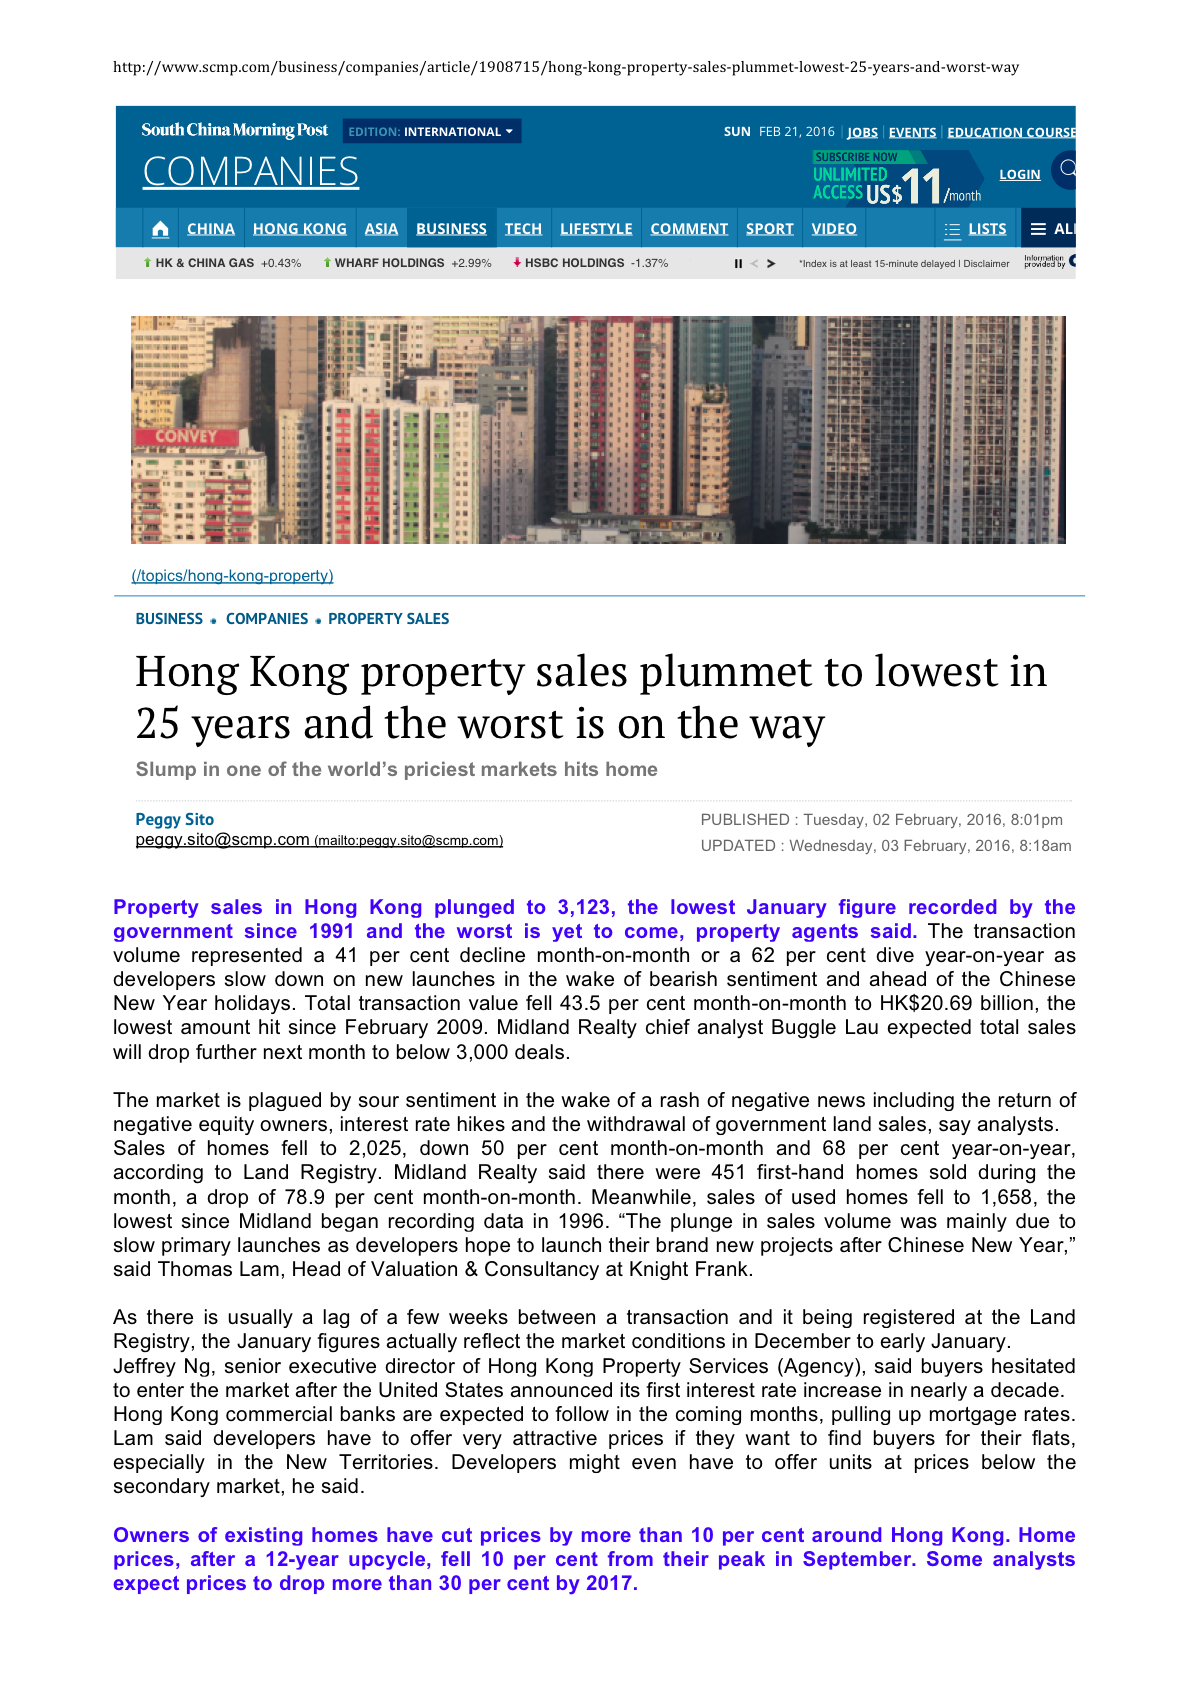 HK Property Sales Plummet to Lowest in 25 Years and the Worst in on the Way